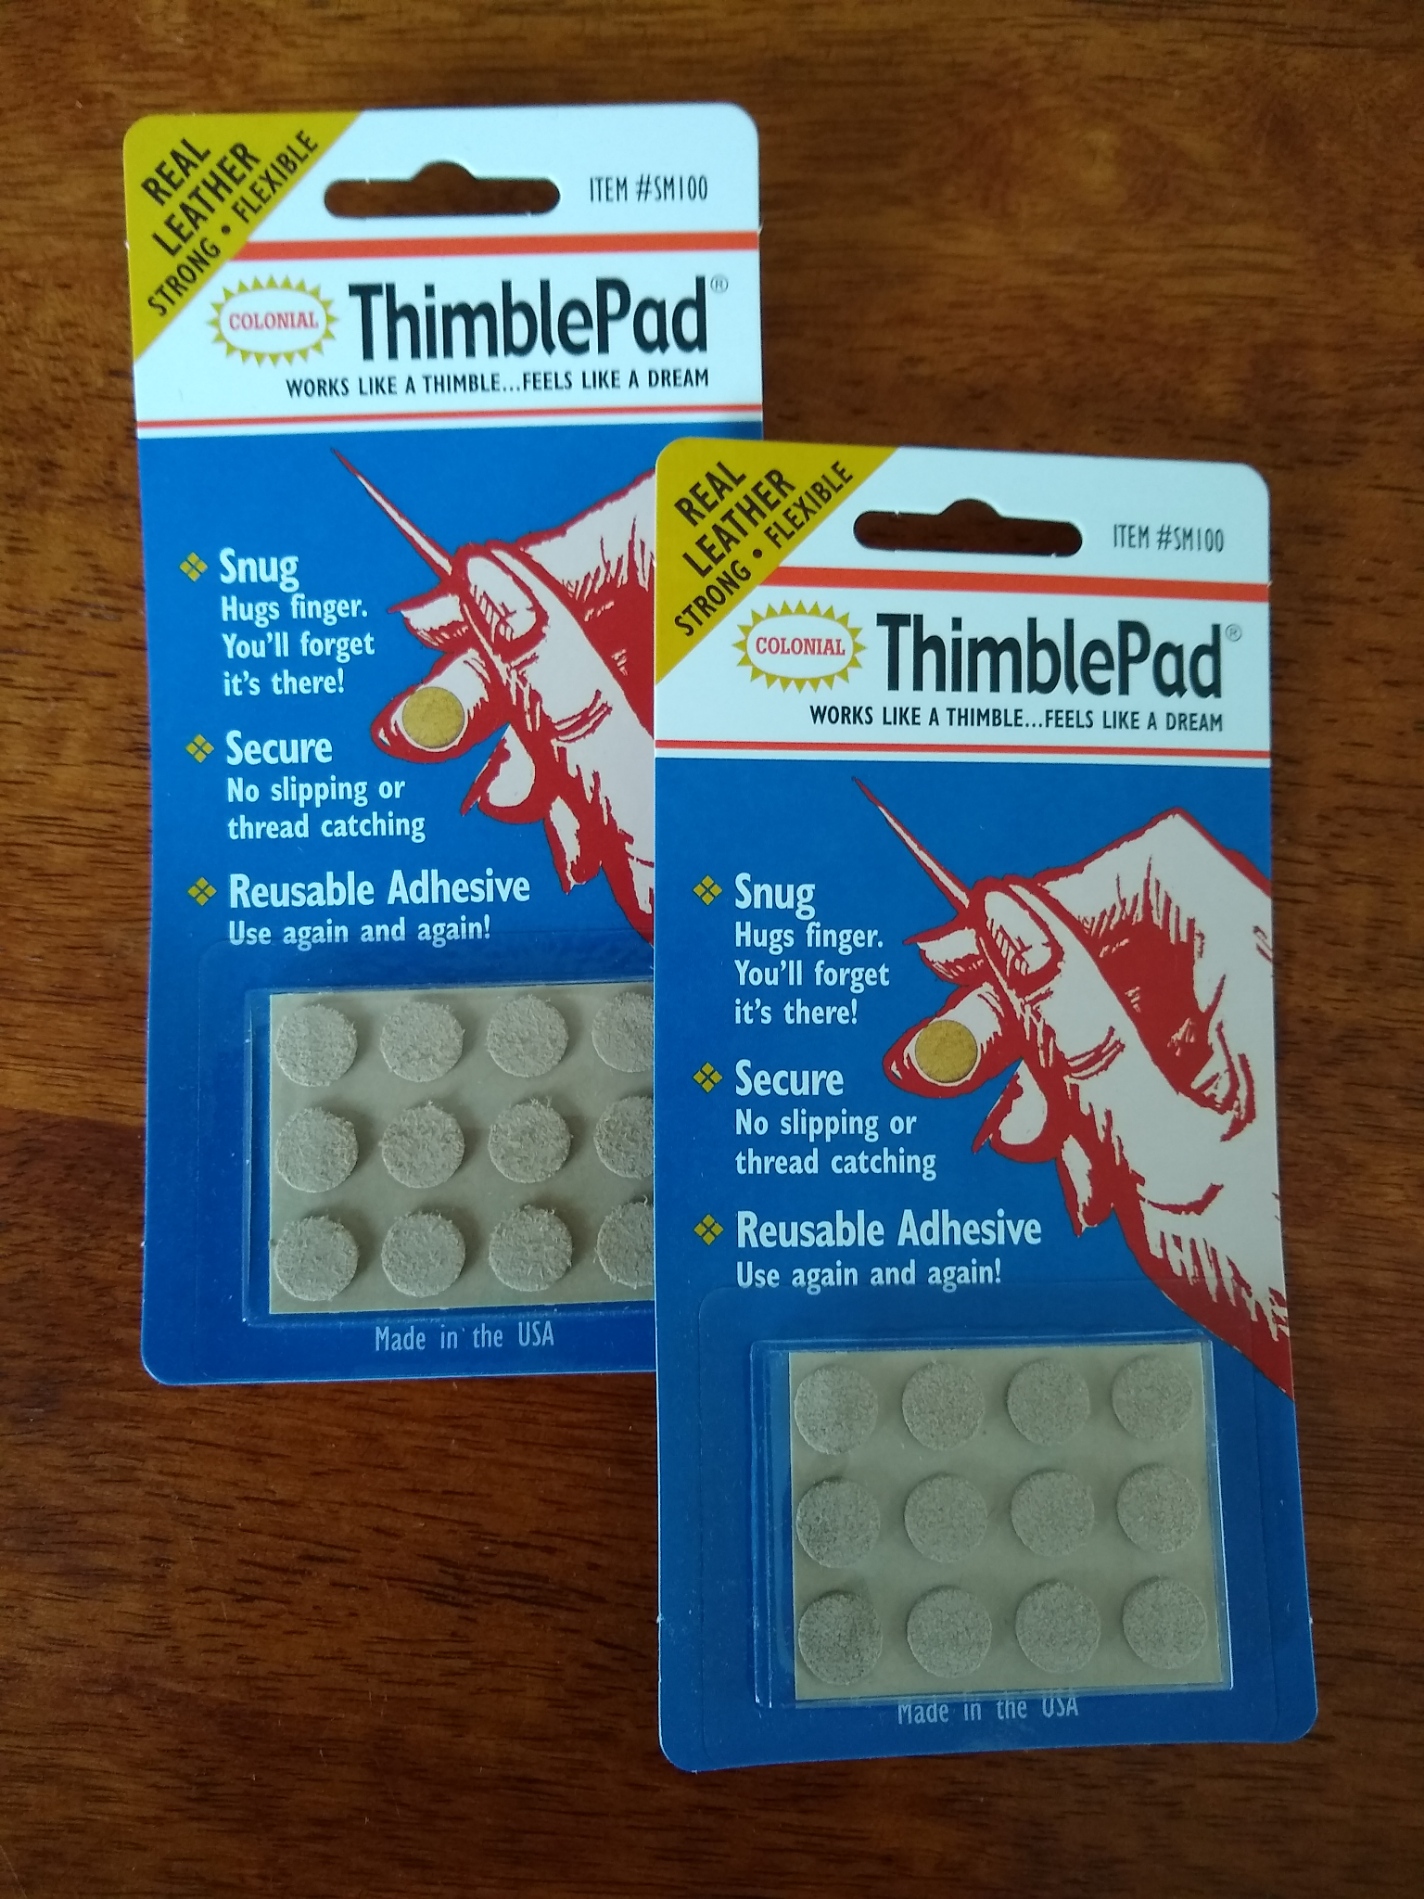 Colonial Needle Thimble It Finger Pad, Beige - 64 count